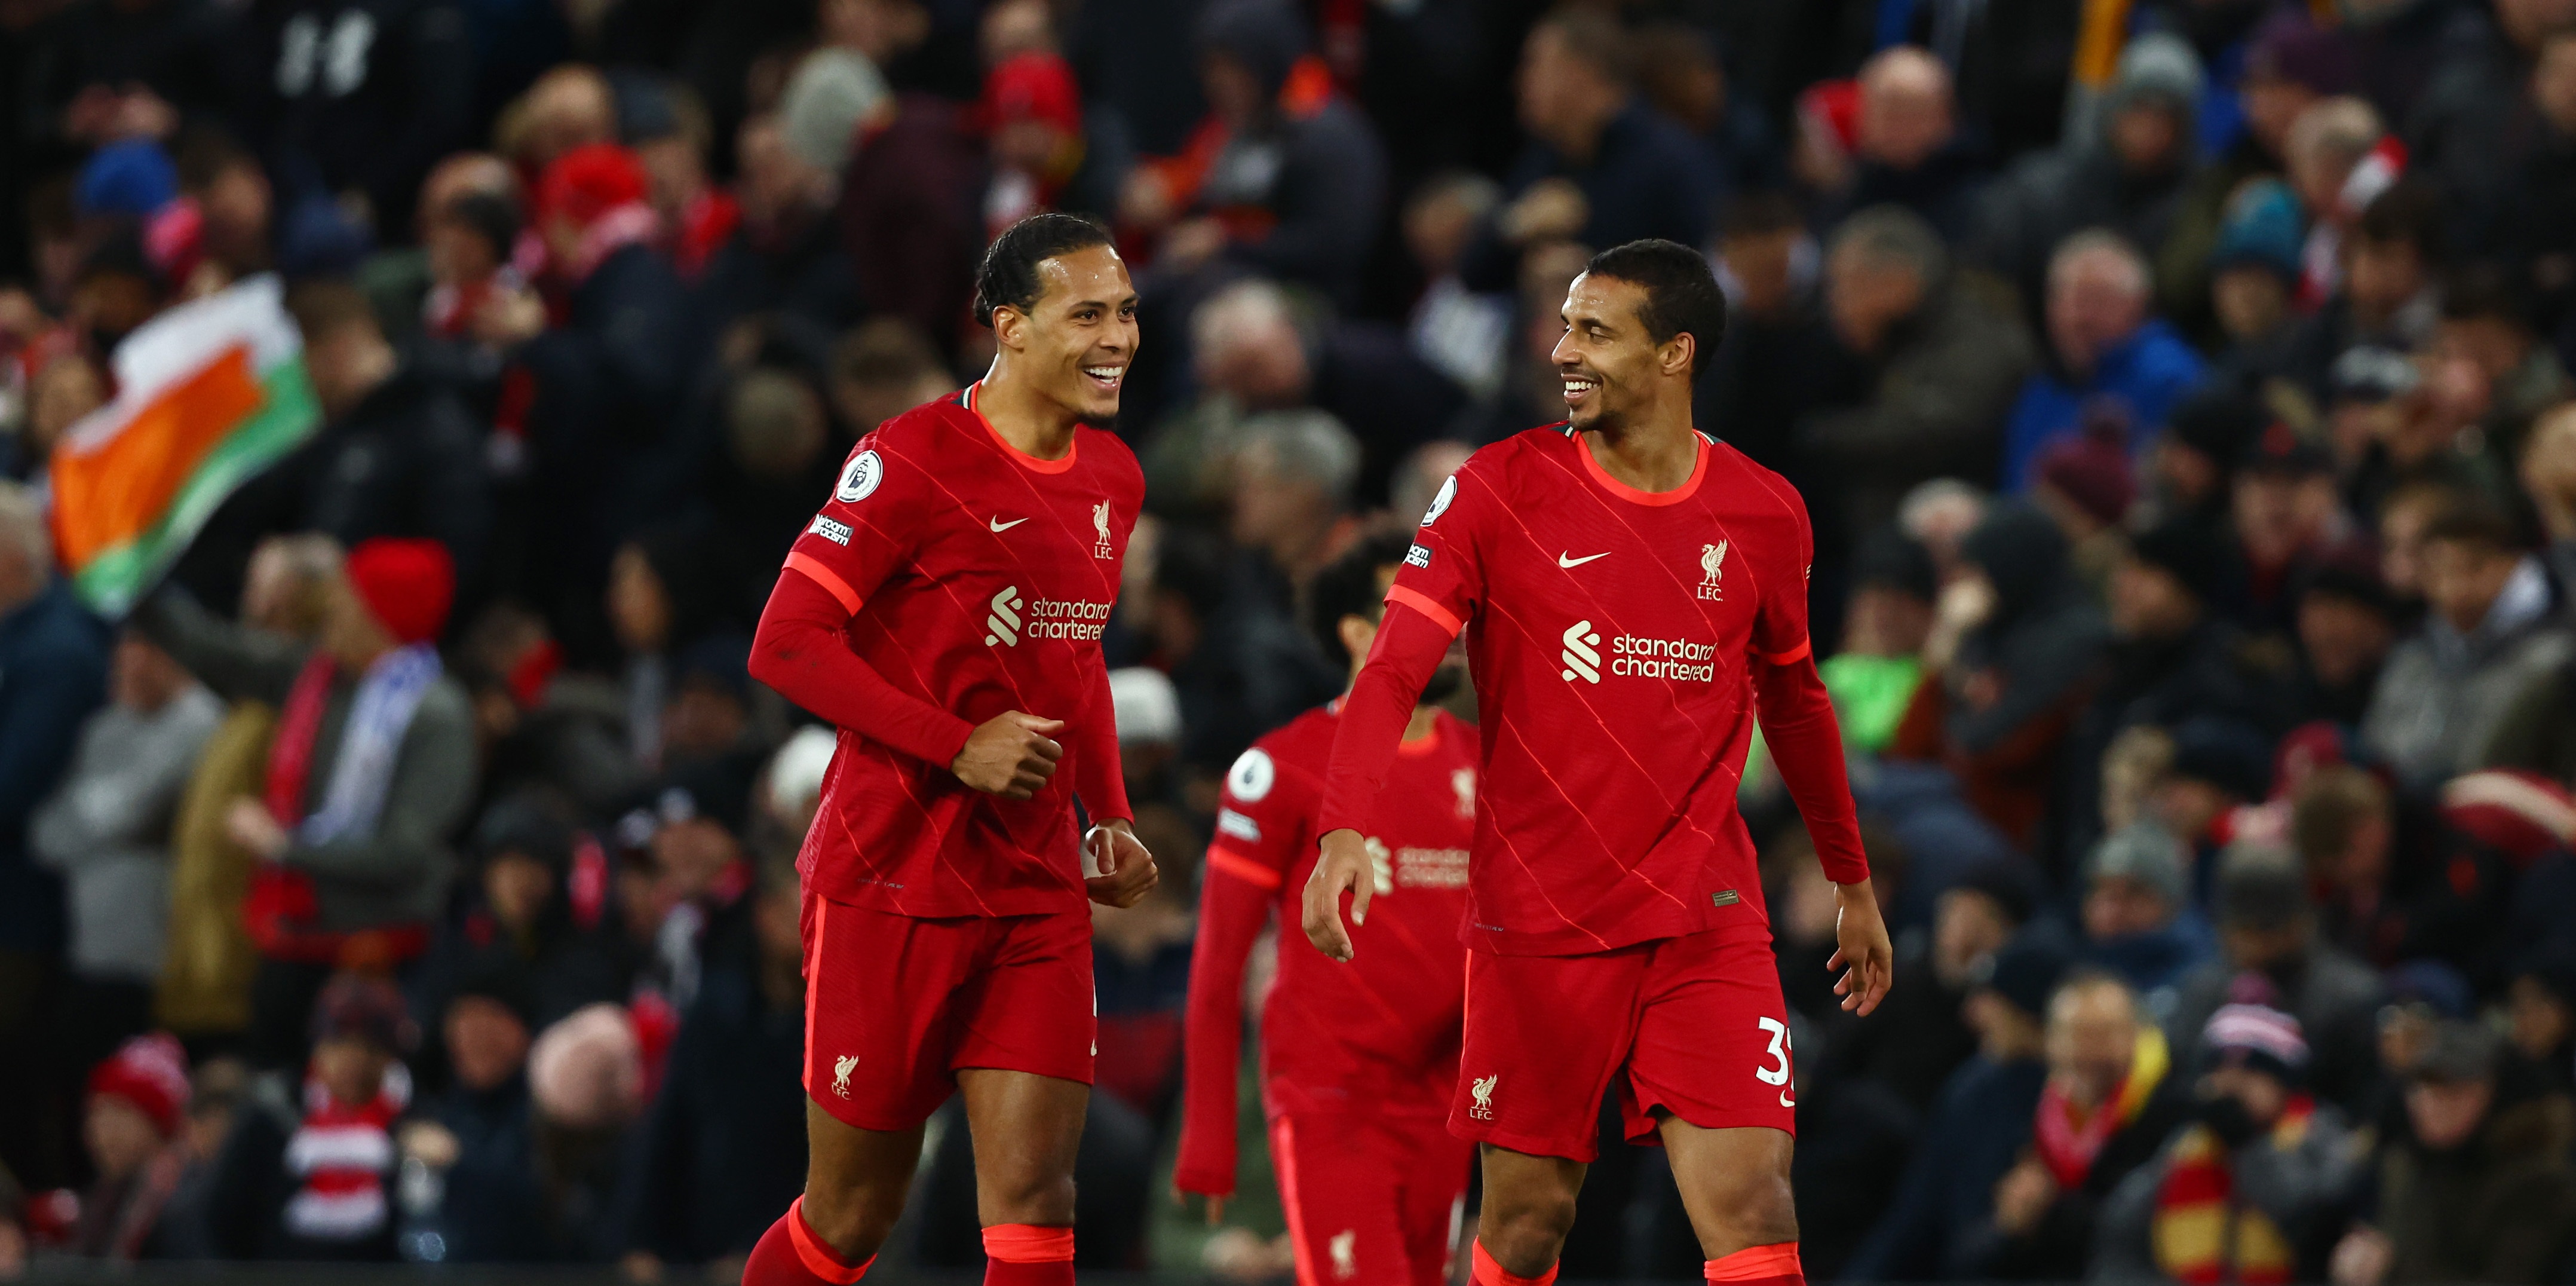 Liverpool fans will be blown away by stats comparing Matip with Van Dijk; suggests former is massively underrated